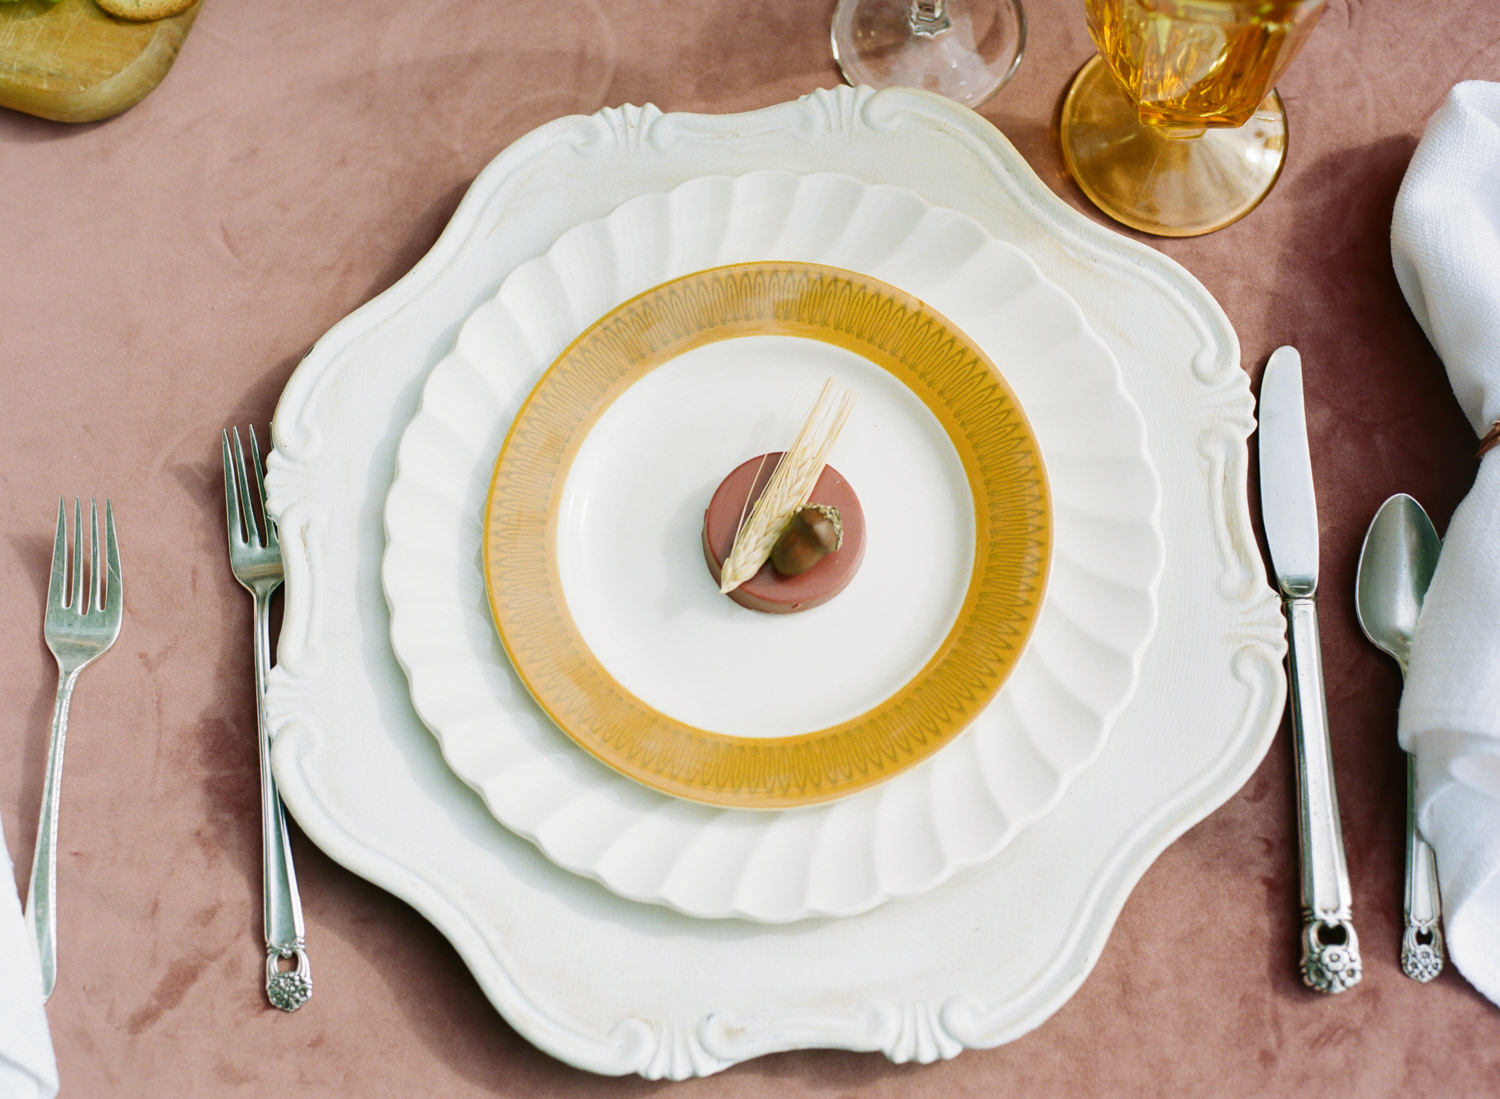 Colored glass, acorn and wheat decorated chocolates, vintage wheat patterned china, rose velvet tablecloth; Thanksgiving table at Emerson Fields; St. Louis fine art film wedding photographer Erica Robnett Photography